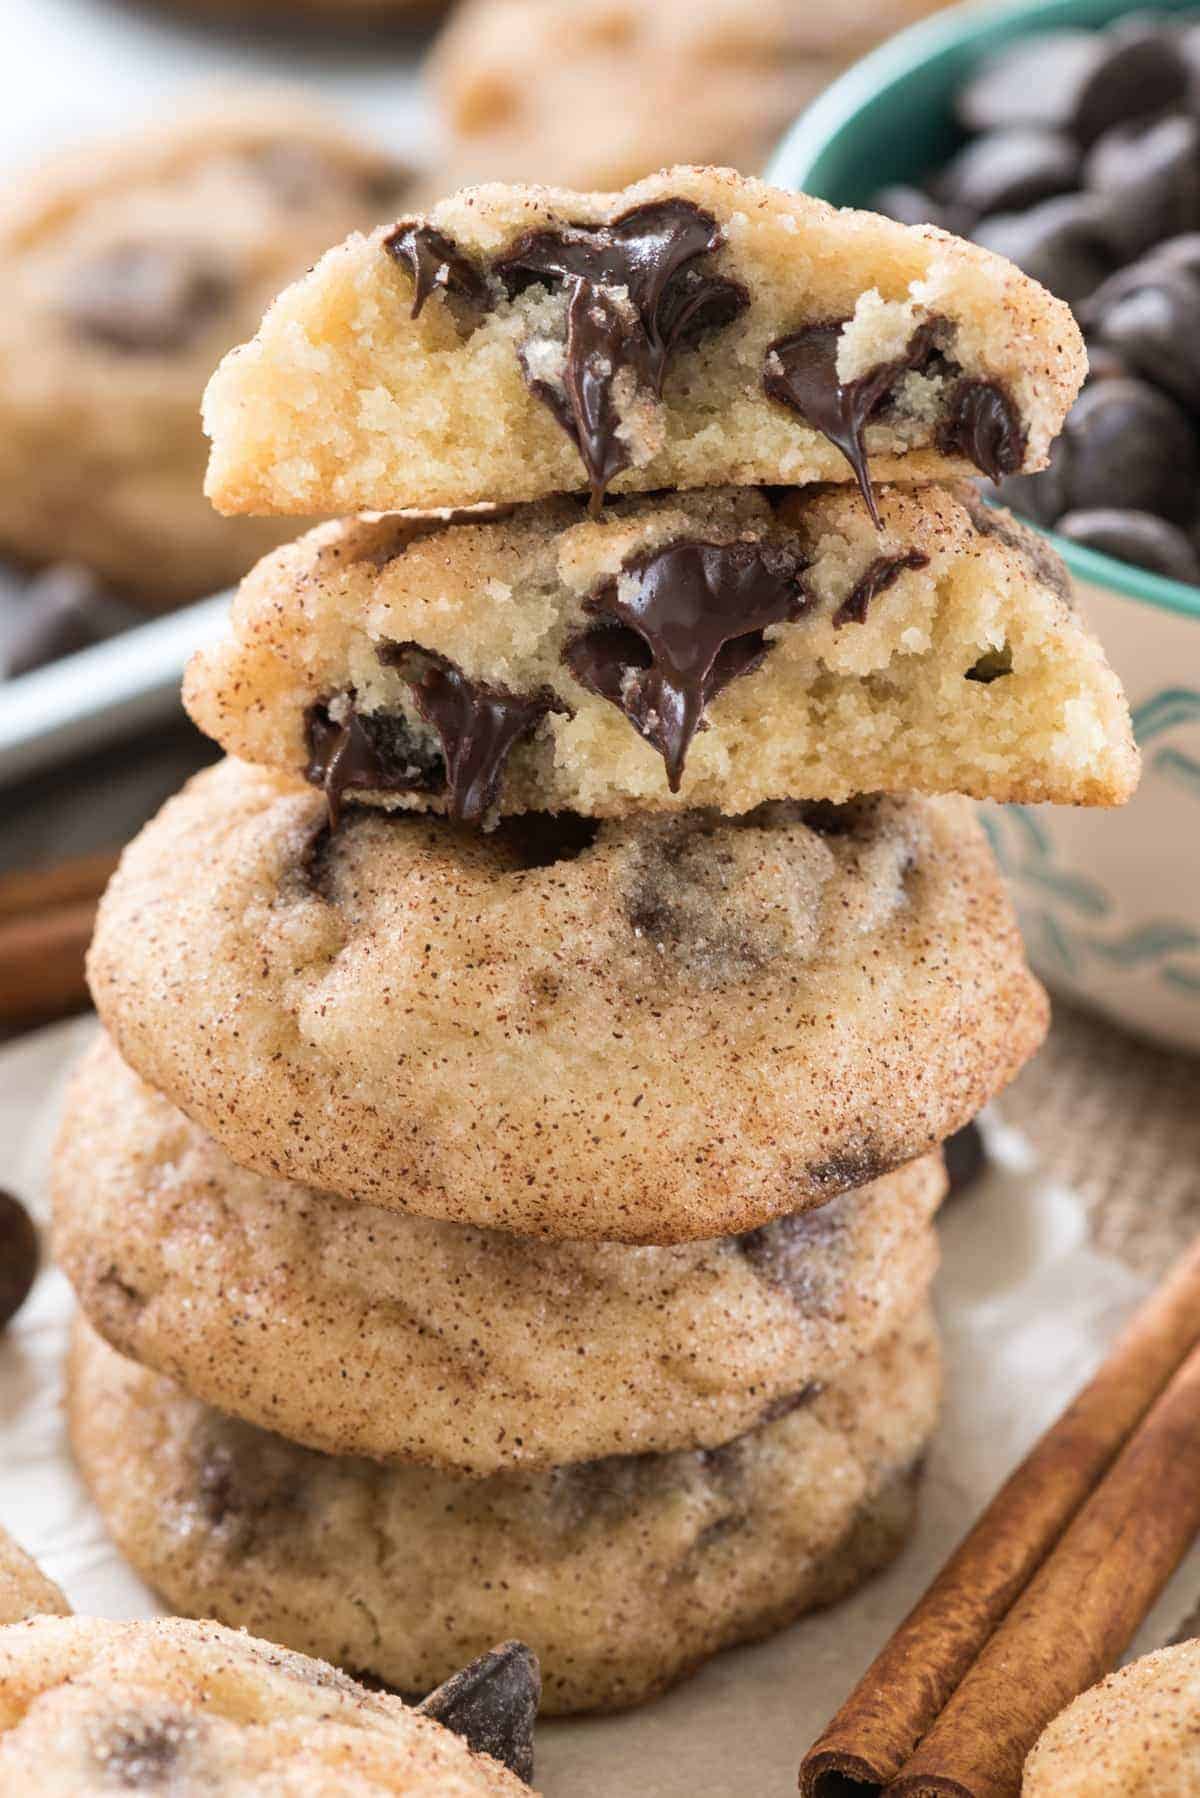 Chocolate chip snickerdoodles